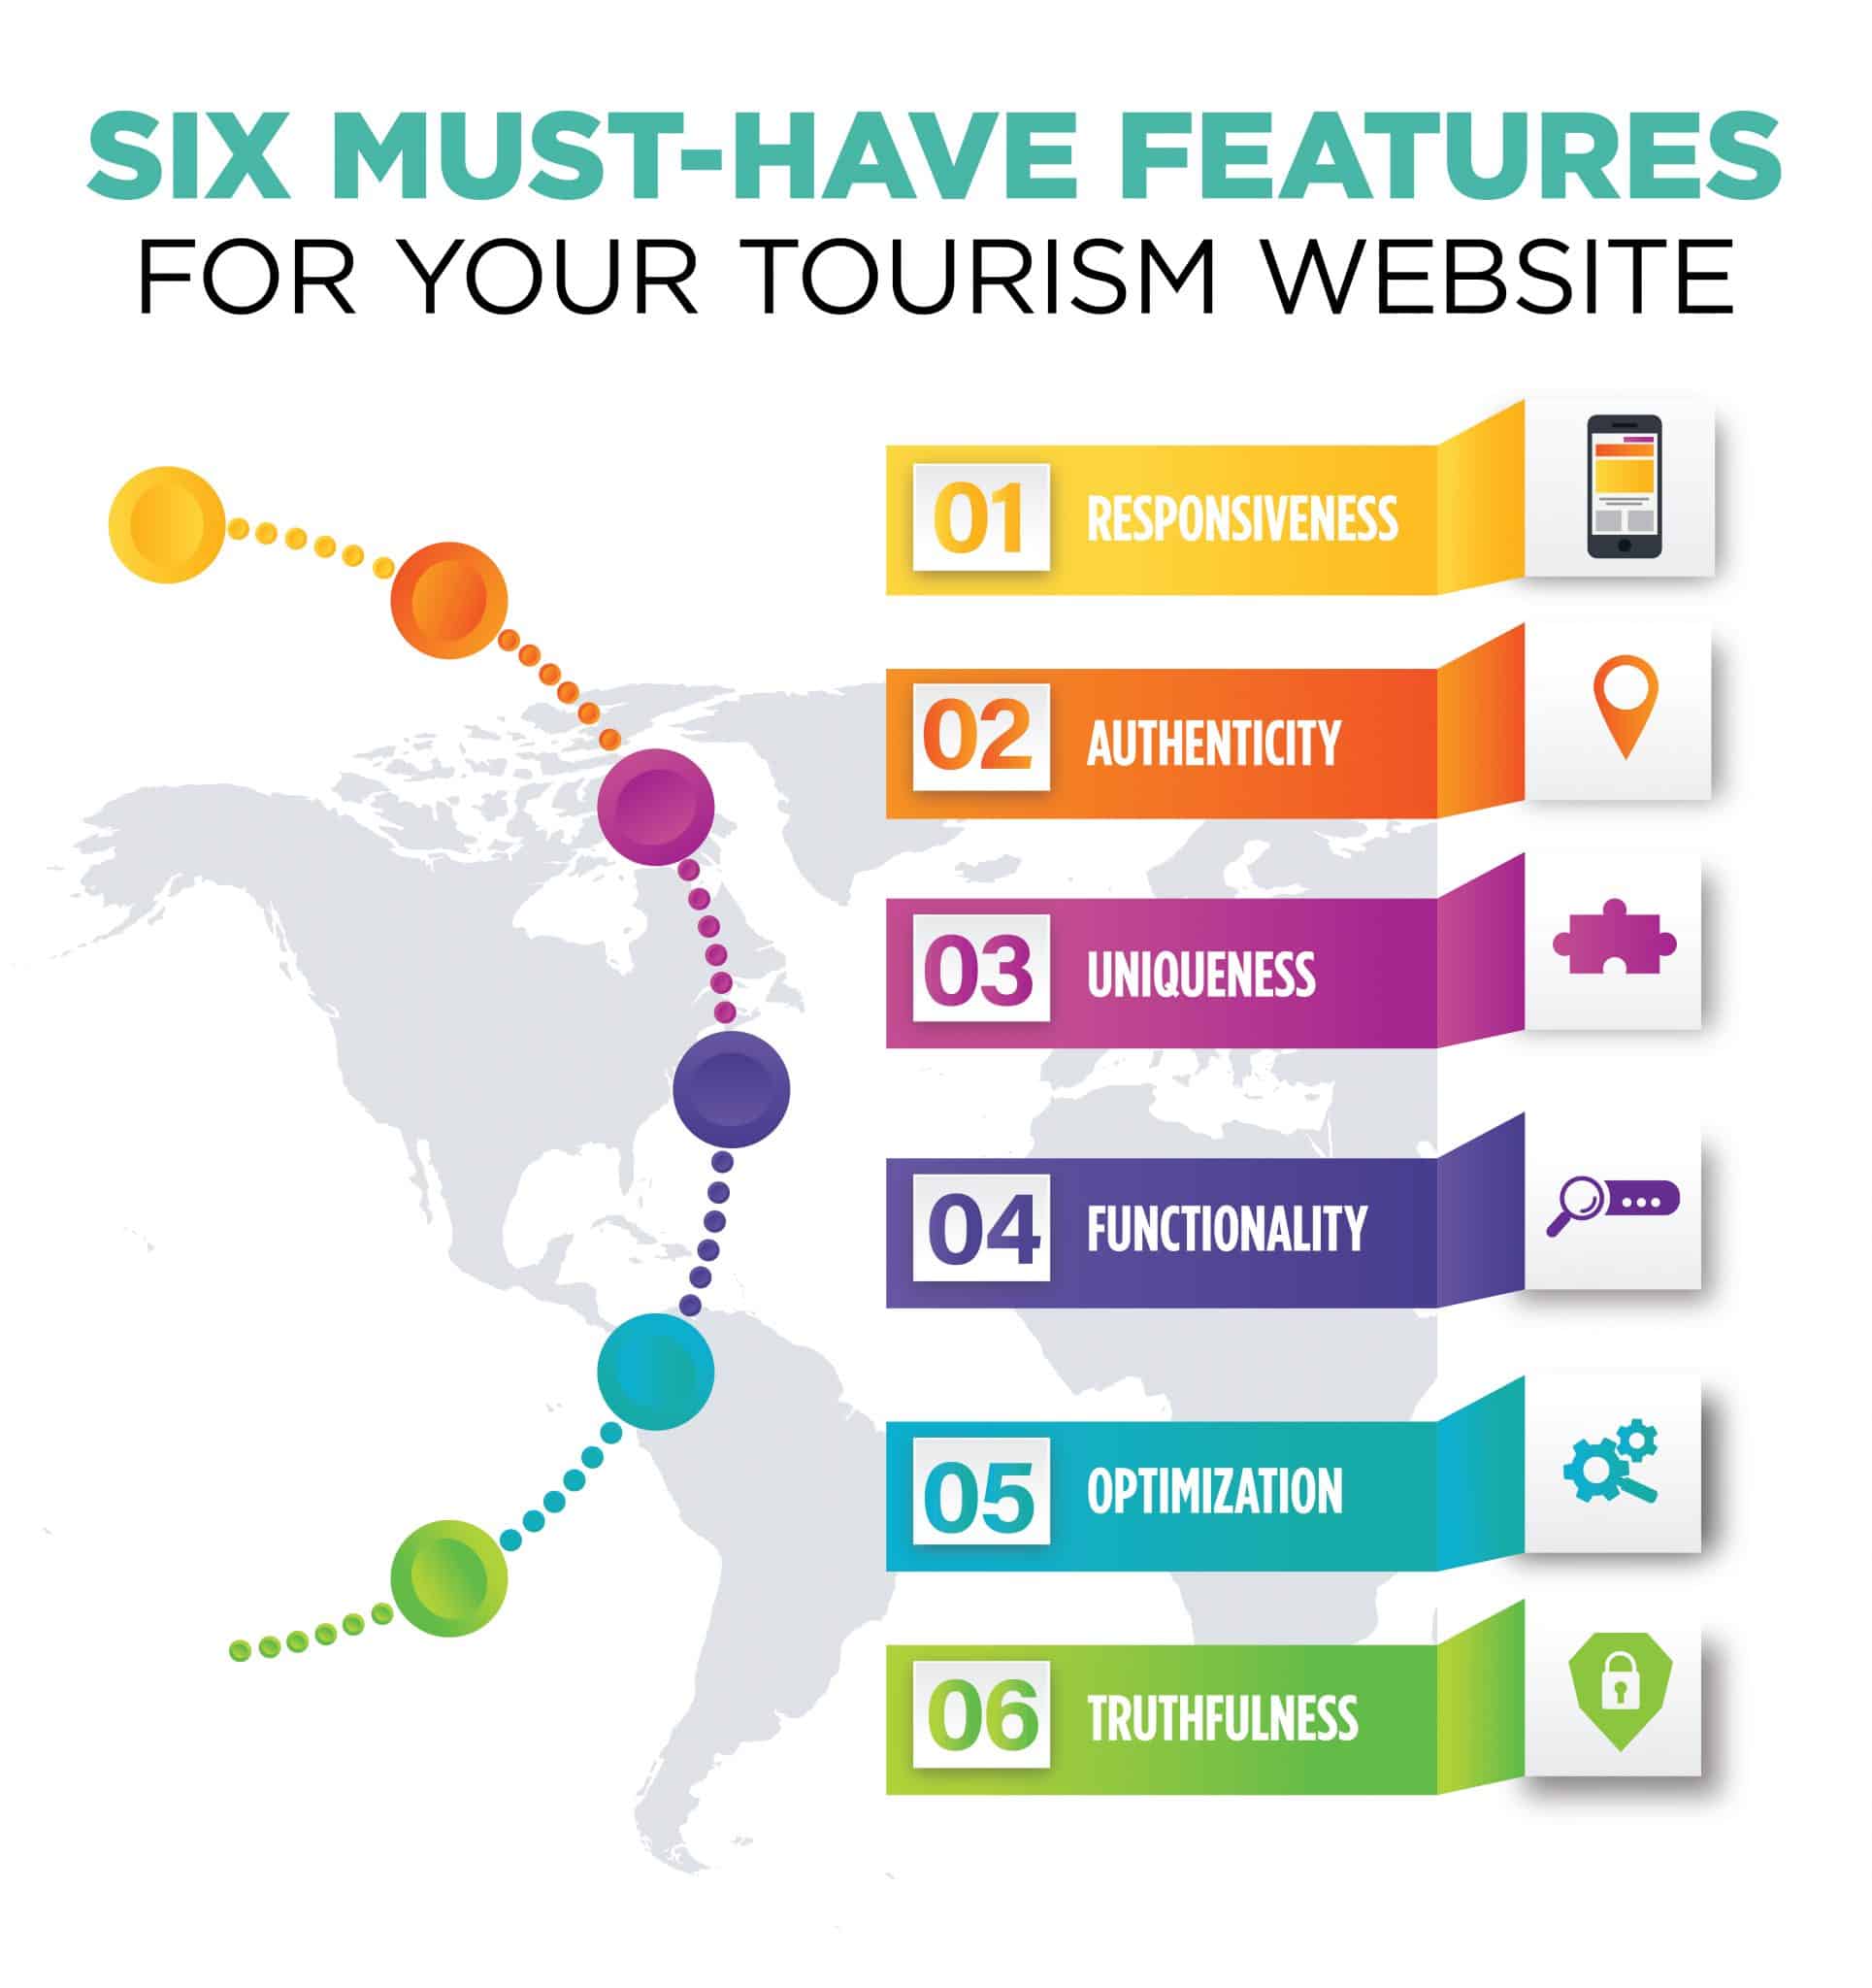 Must-have features for your tourism website